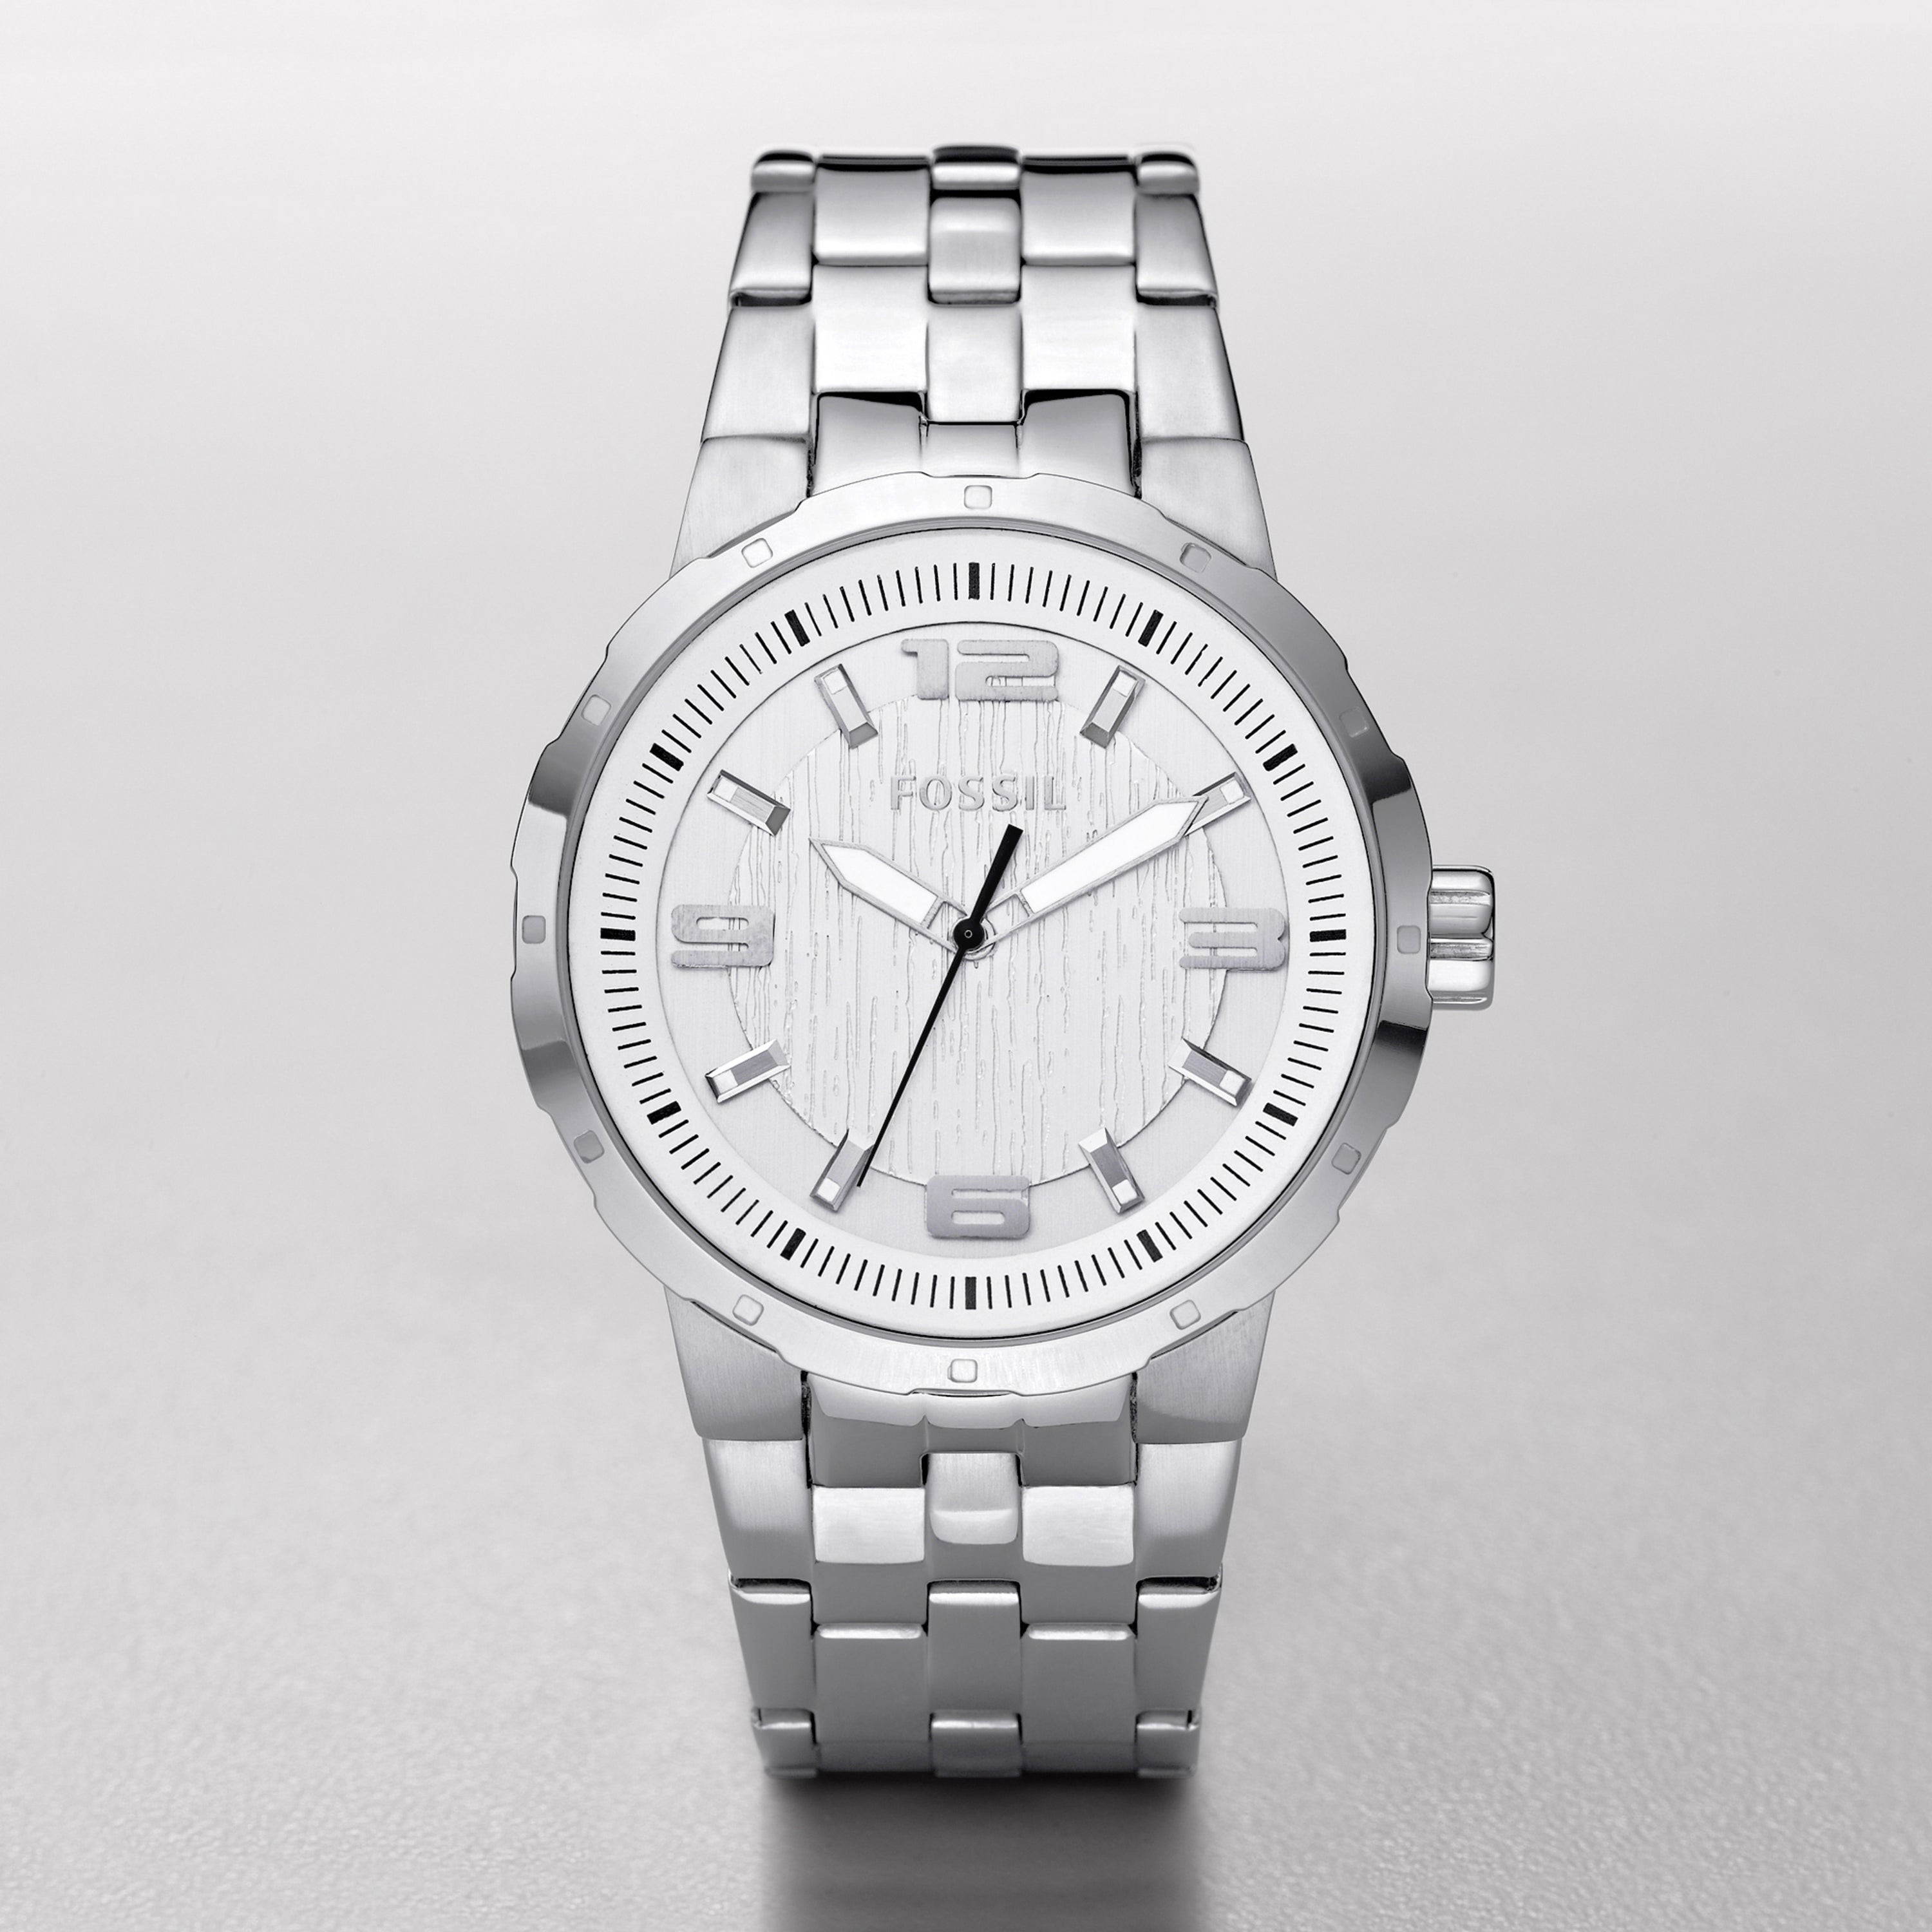 Fossil Mens Sport Watch SS Silver/English